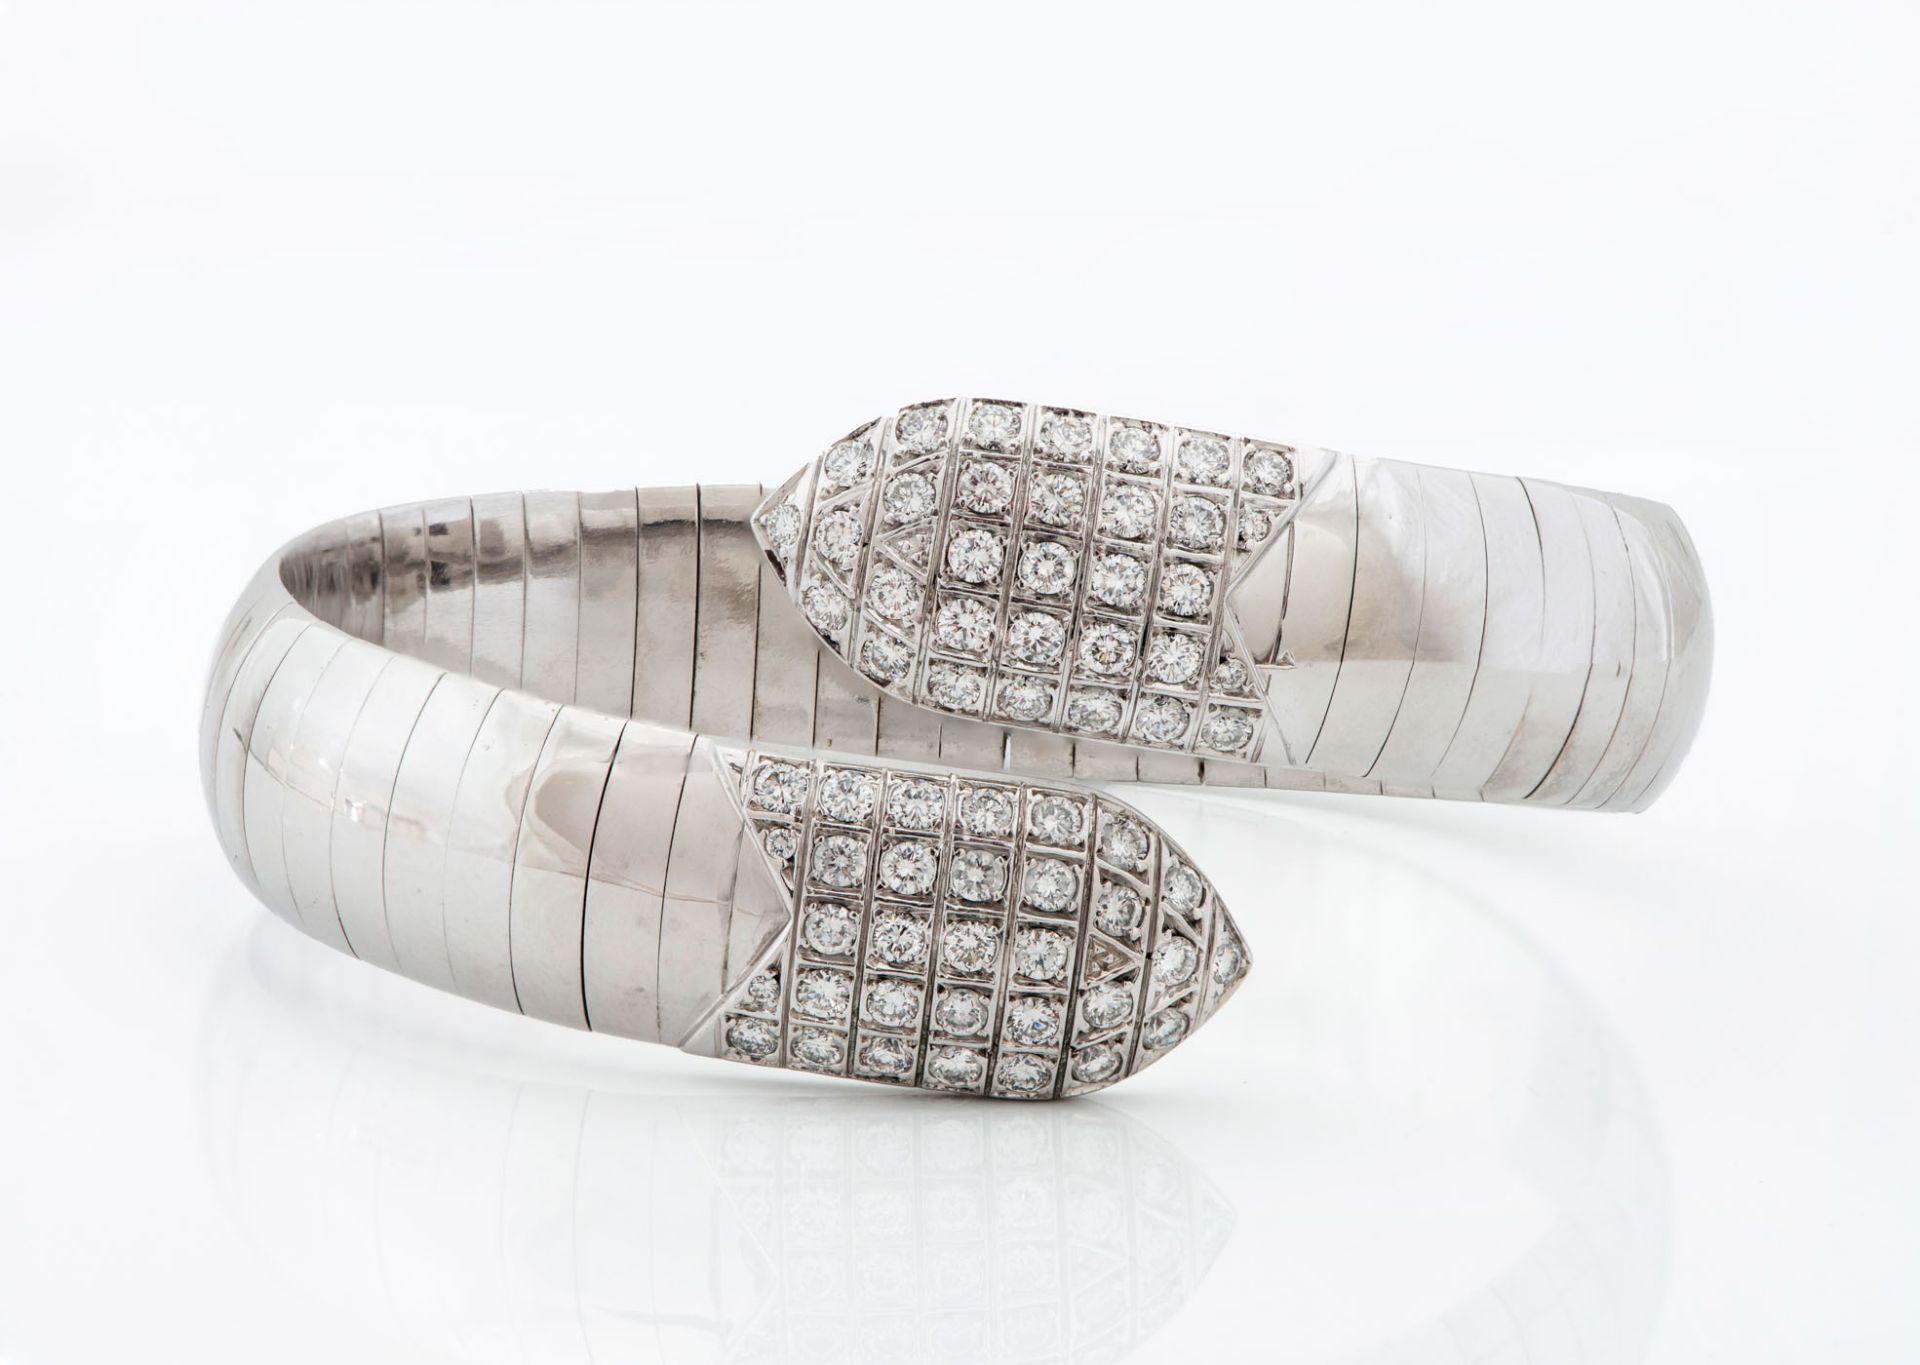 A Chaumet Plume 18K White Gold and Diamond Bangle - Image 2 of 3